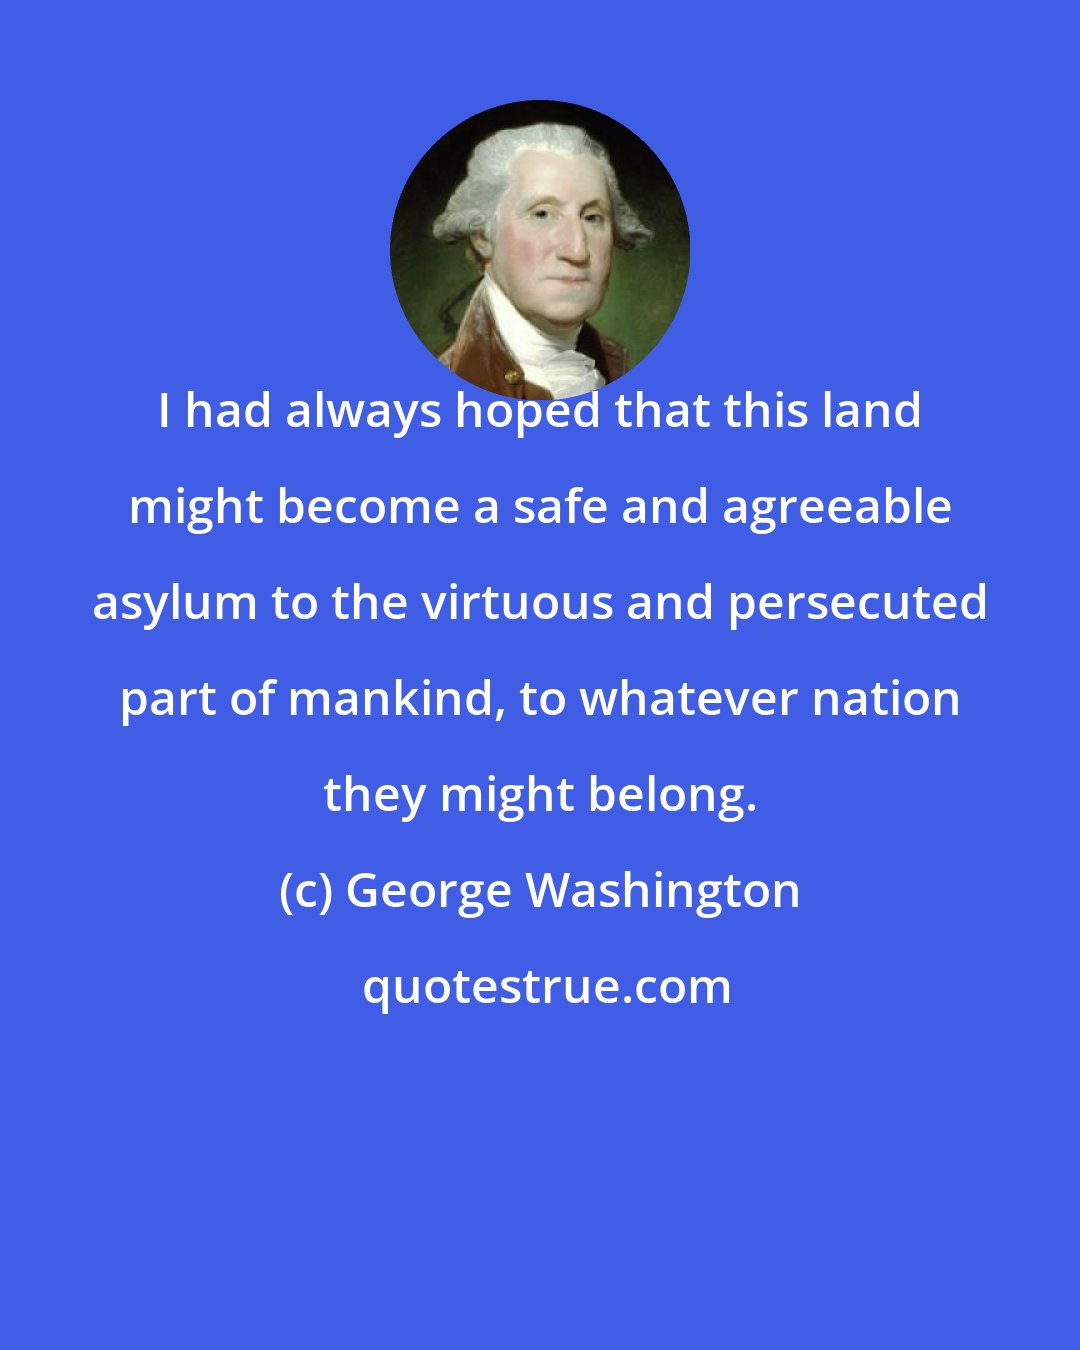 George Washington: I had always hoped that this land might become a safe and agreeable asylum to the virtuous and persecuted part of mankind, to whatever nation they might belong.